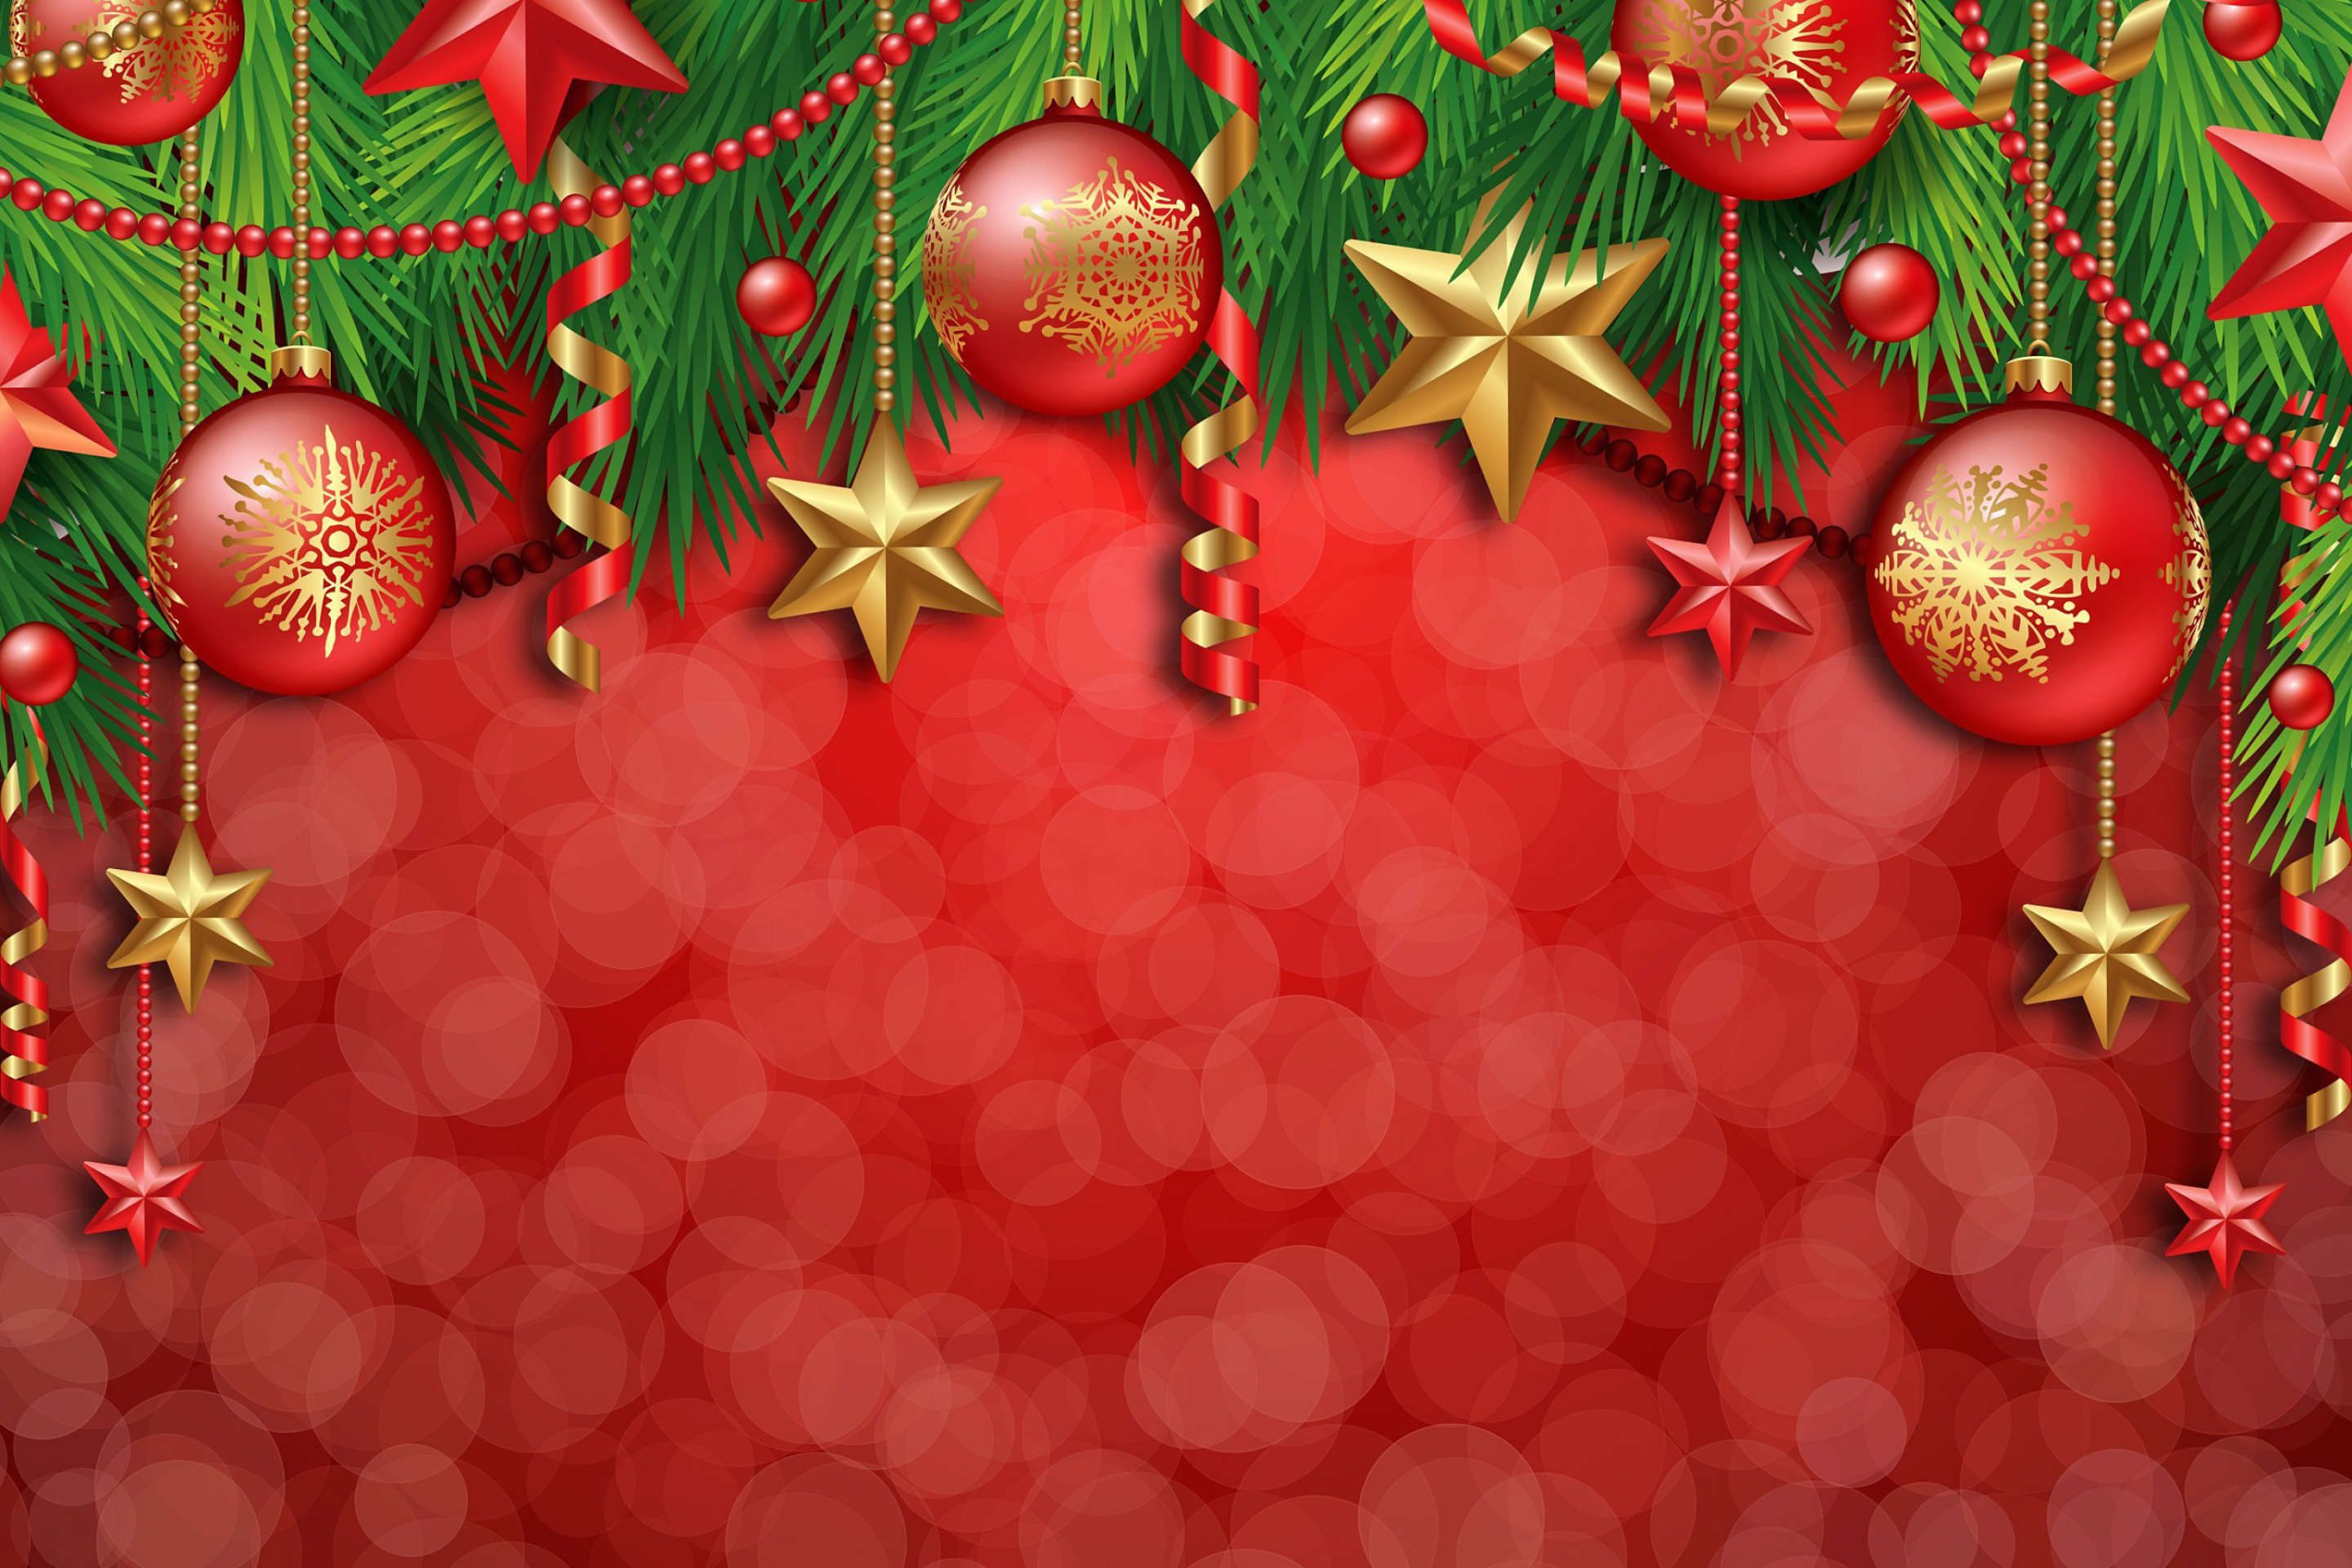 Red Christmas Decorations wallpaper 2880x1920